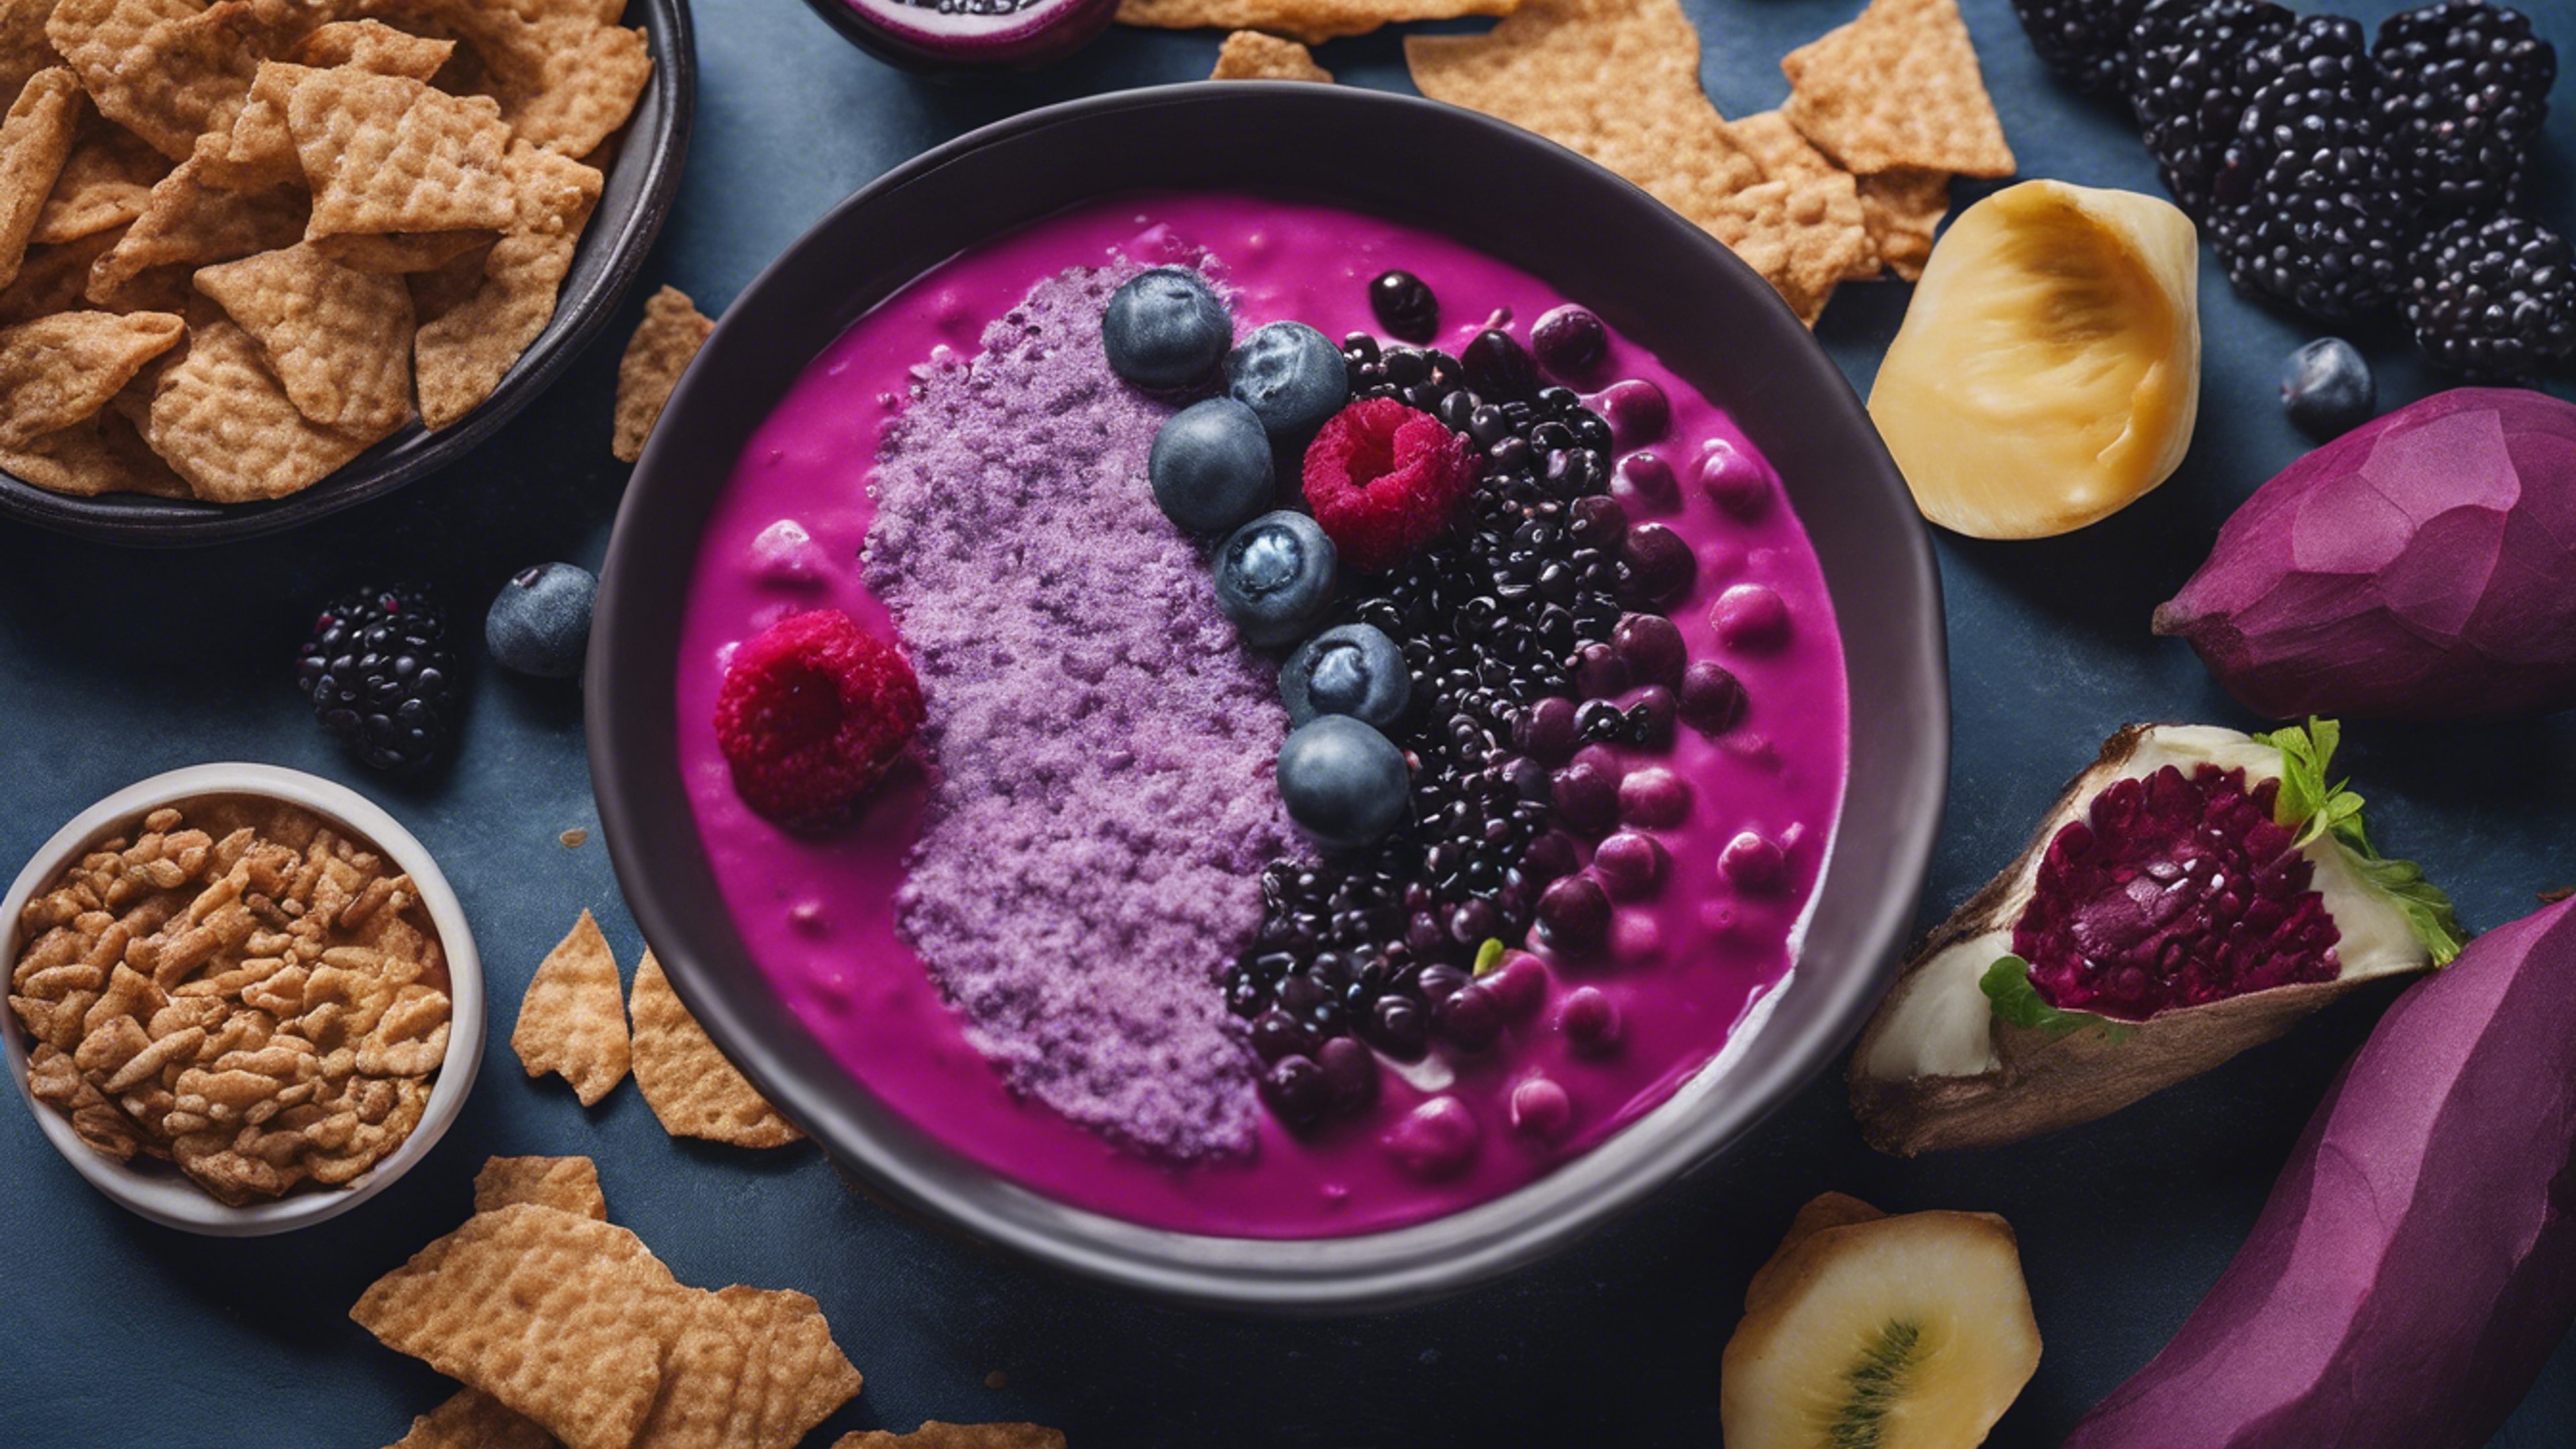 An eye-catching food collage, with purple foods like acai bowls, blue corn chips, and beetroot soup. ផ្ទាំង​រូបភាព[72264552455b47748fee]